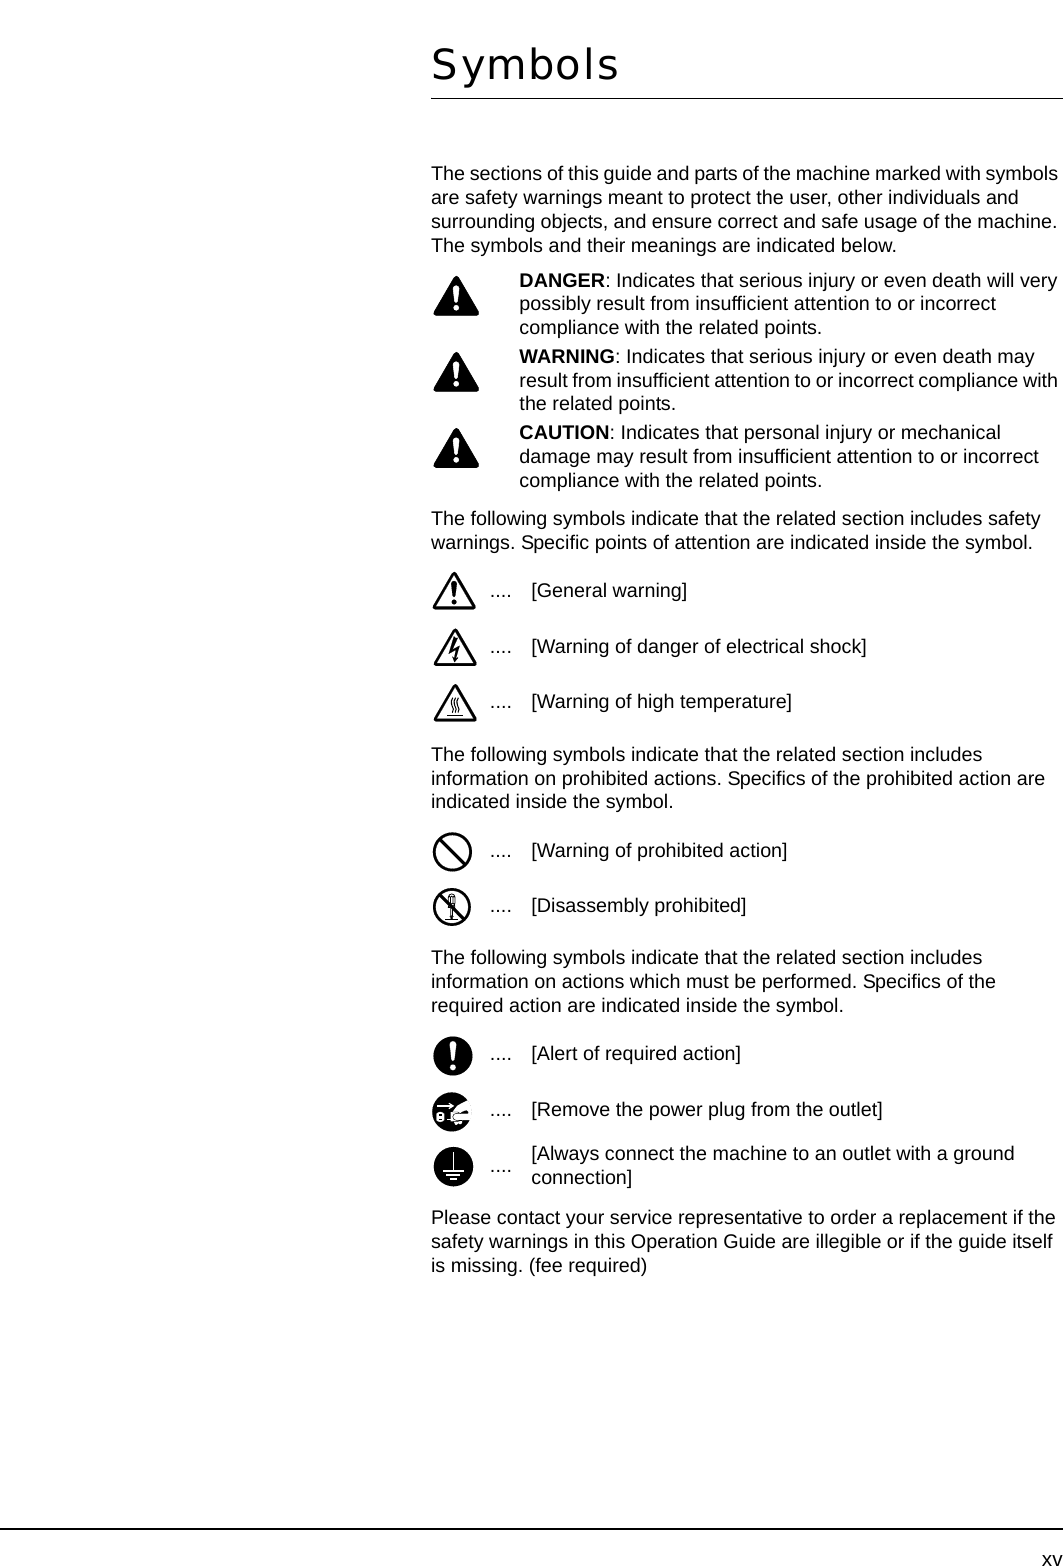 xvSymbolsThe sections of this guide and parts of the machine marked with symbols are safety warnings meant to protect the user, other individuals and surrounding objects, and ensure correct and safe usage of the machine. The symbols and their meanings are indicated below.The following symbols indicate that the related section includes safety warnings. Specific points of attention are indicated inside the symbol.The following symbols indicate that the related section includes information on prohibited actions. Specifics of the prohibited action are indicated inside the symbol. The following symbols indicate that the related section includes information on actions which must be performed. Specifics of the required action are indicated inside the symbol.Please contact your service representative to order a replacement if the safety warnings in this Operation Guide are illegible or if the guide itself is missing. (fee required)DANGER: Indicates that serious injury or even death will very possibly result from insufficient attention to or incorrect compliance with the related points.WARNING: Indicates that serious injury or even death may result from insufficient attention to or incorrect compliance with the related points.CAUTION: Indicates that personal injury or mechanical damage may result from insufficient attention to or incorrect compliance with the related points..... [General warning].... [Warning of danger of electrical shock].... [Warning of high temperature].... [Warning of prohibited action].... [Disassembly prohibited].... [Alert of required action].... [Remove the power plug from the outlet].... [Always connect the machine to an outlet with a ground connection]